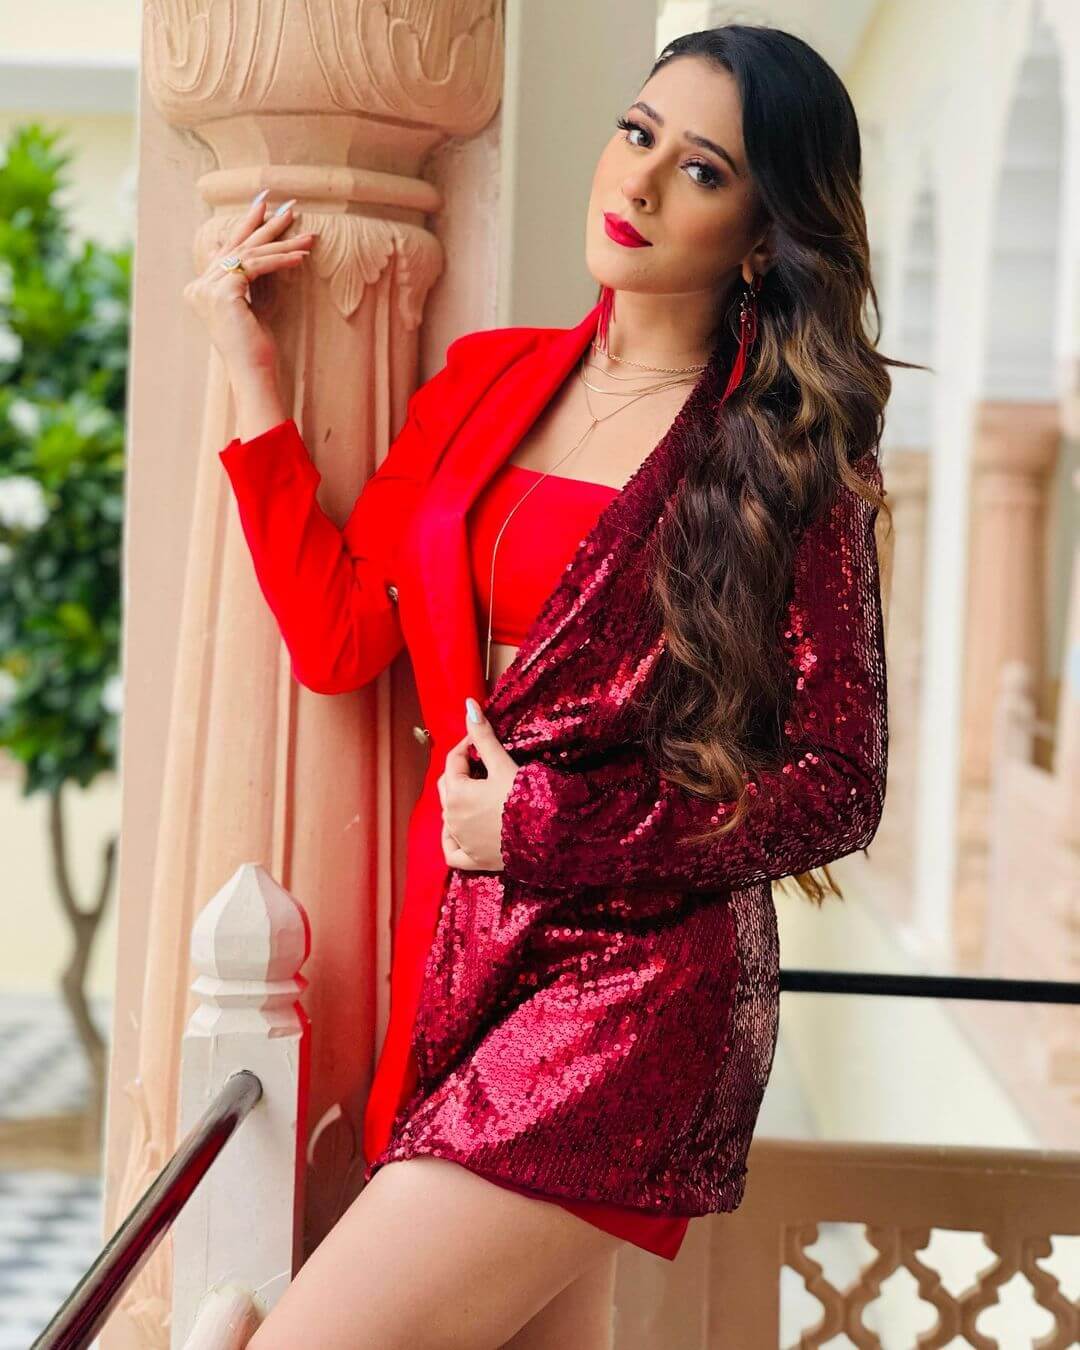 Hiba Nawab Setting New Trend In Red Suit Piece Outfit Hiba Nawab Stunning Looks And Outfit